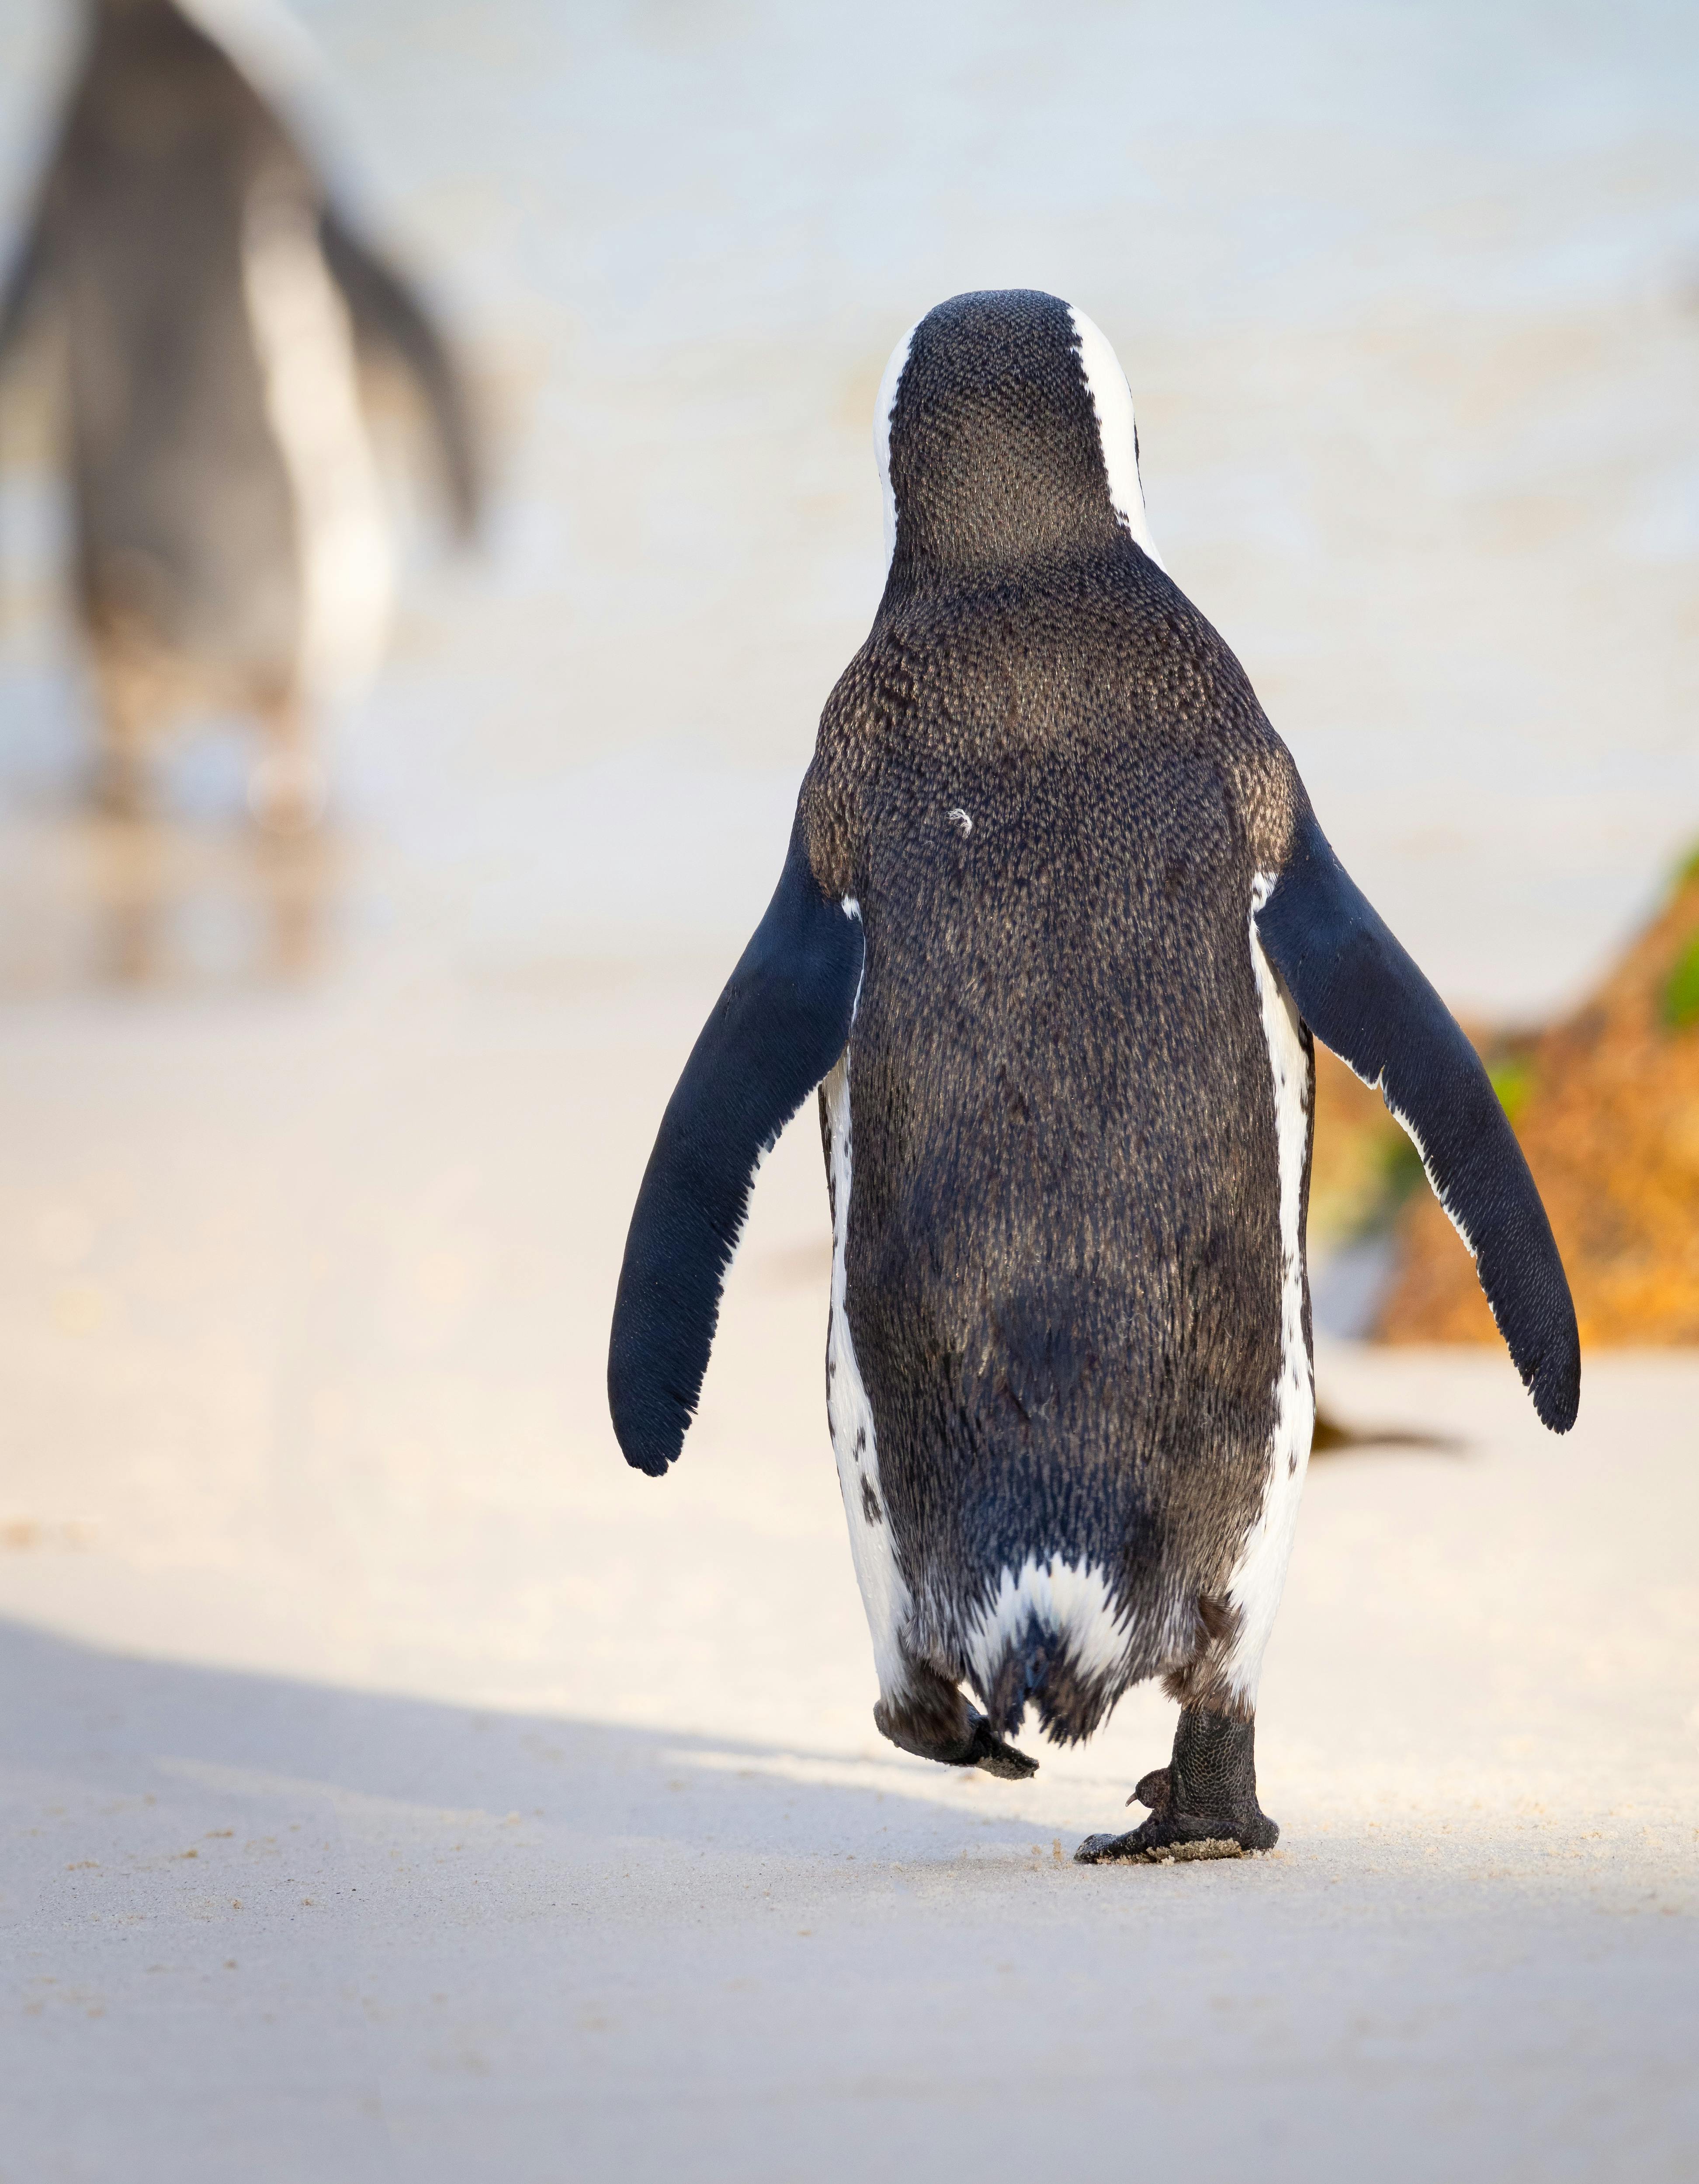 Penguin Photos, Download The BEST Free Penguin Stock Photos & HD Images